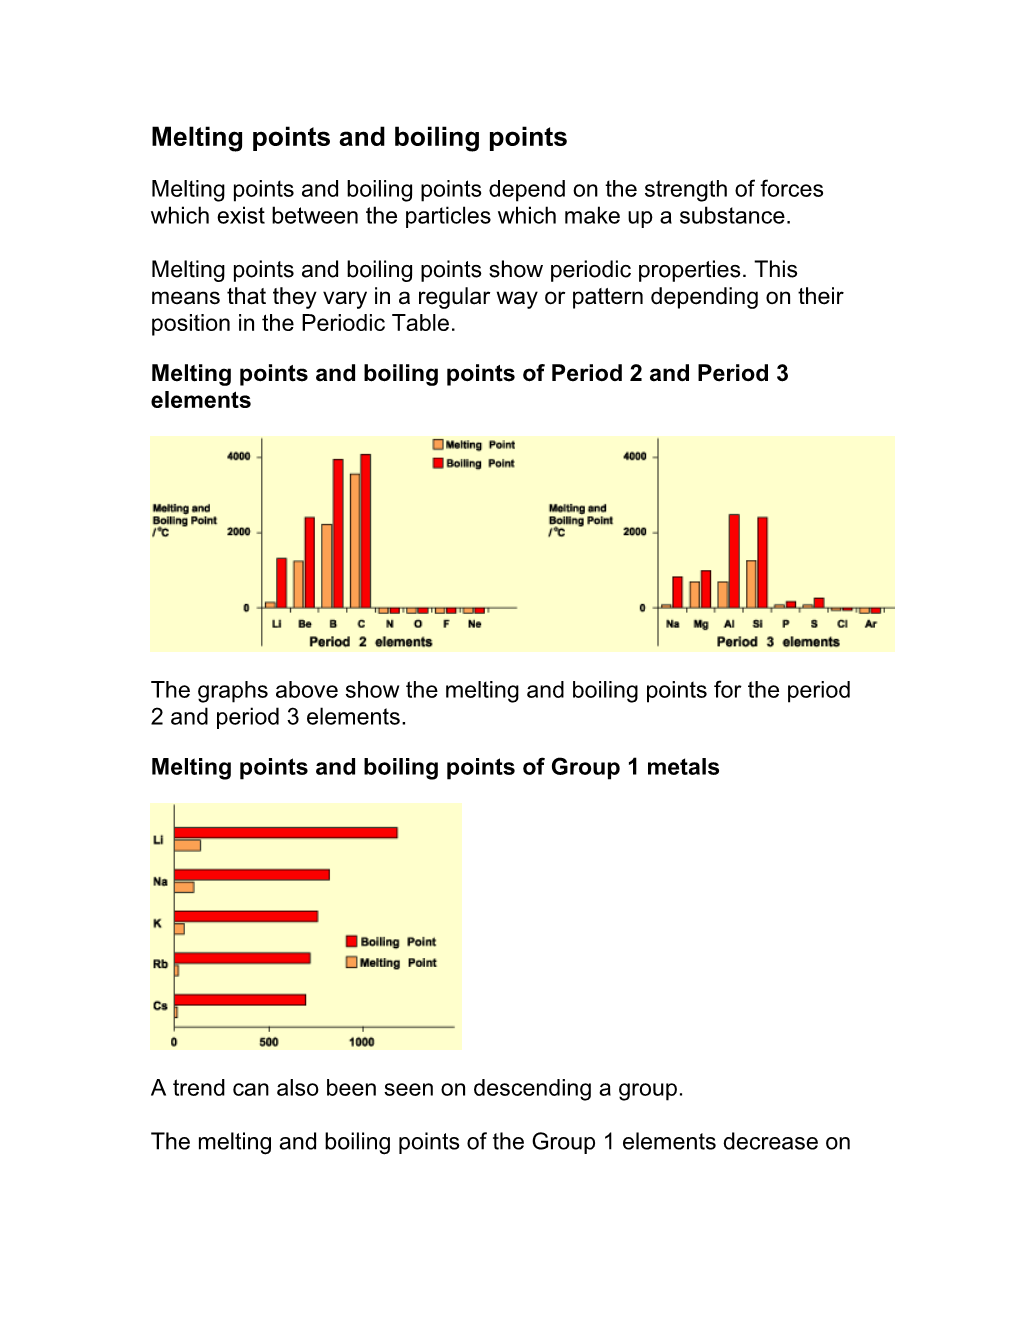 Melting Points and Boiling Points